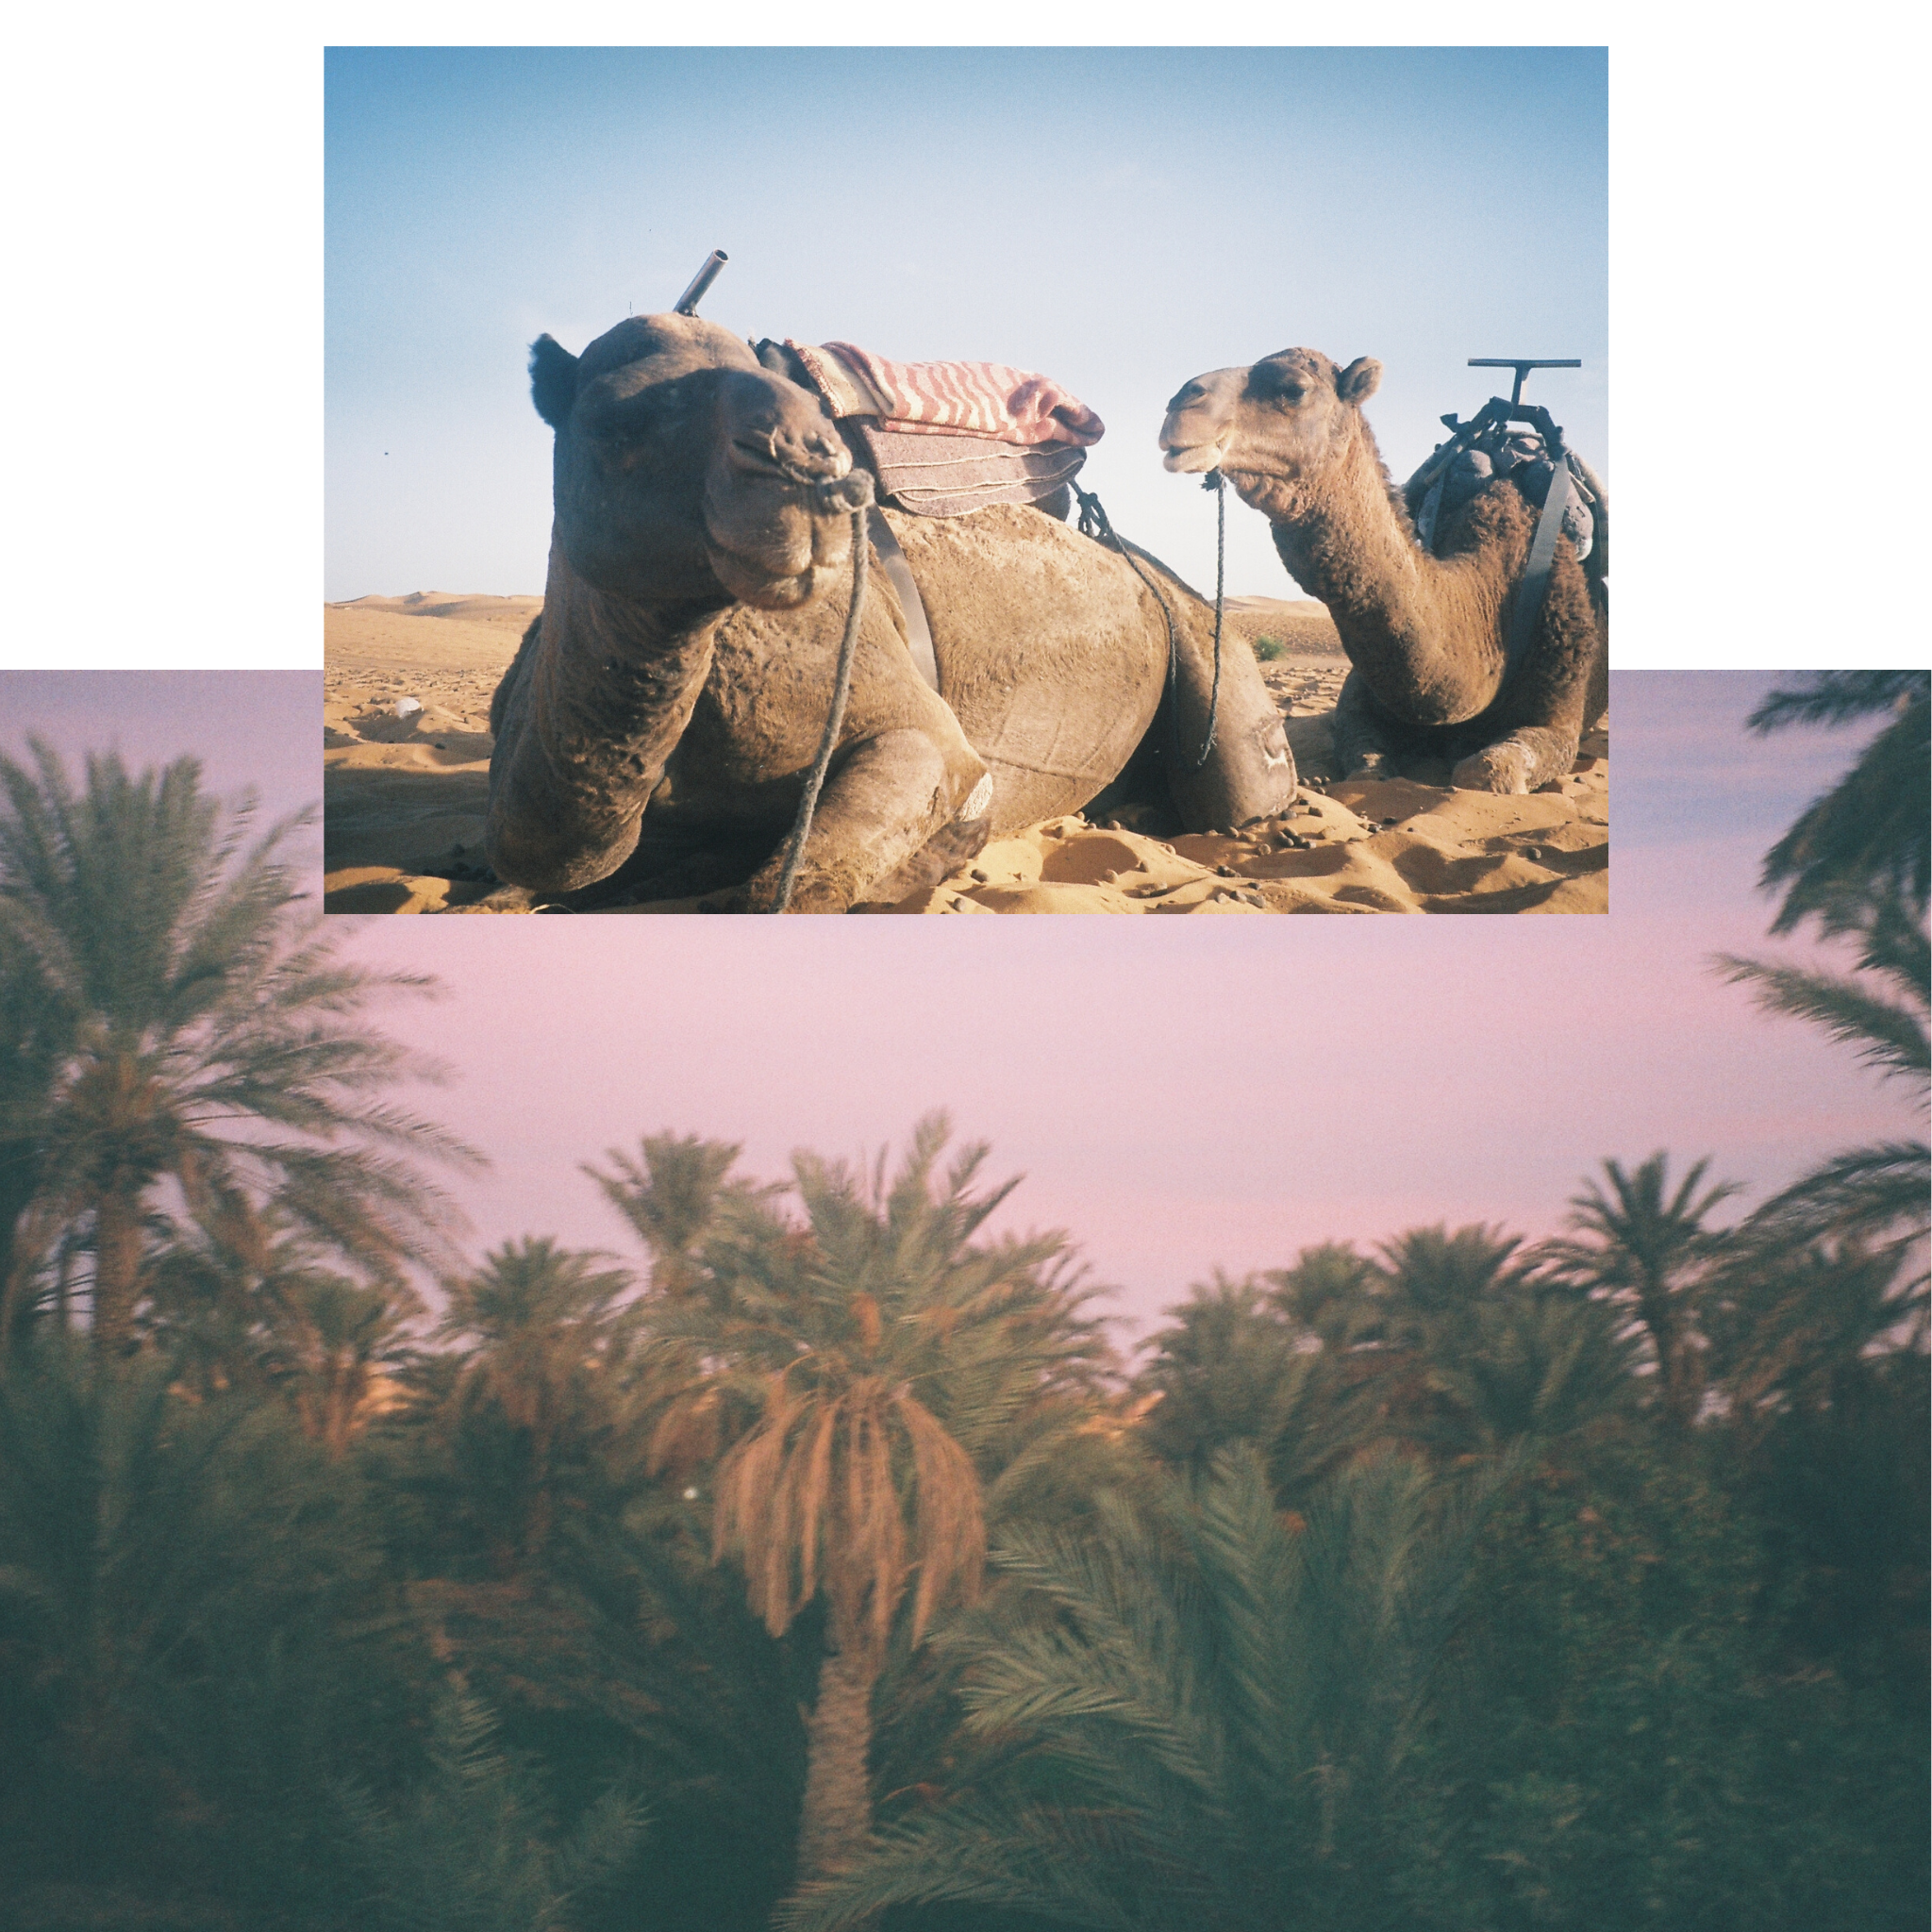 Morocco on film, camels in the desert